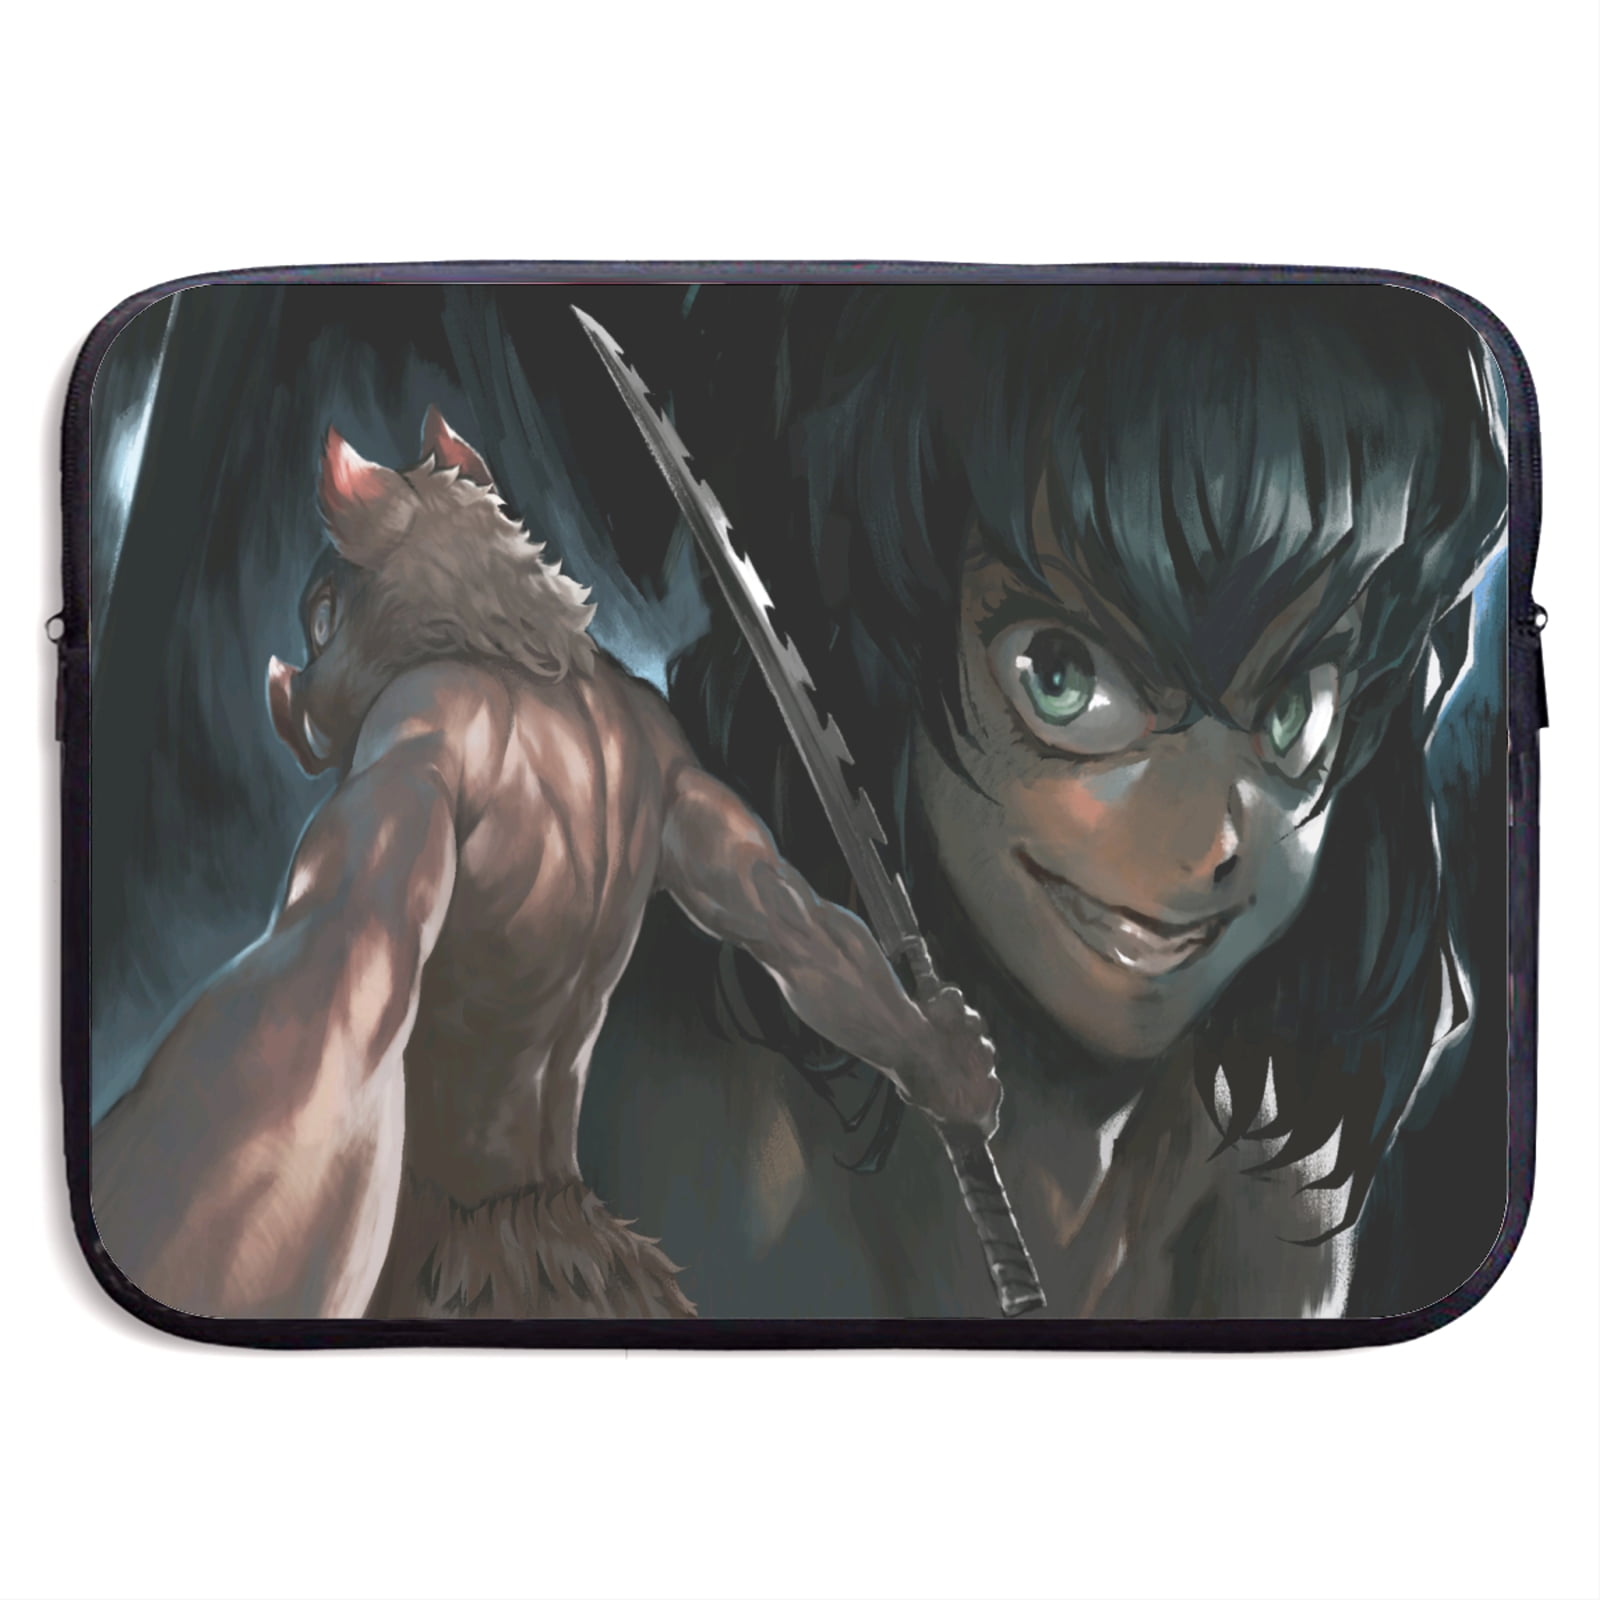 Anime Game Hero Warrior Dragon 13-Inch to 15-Inch Laptop Sleeve Case Waterproof Notebook Computer Bag-Light and Comfortable Tablet Briefcase-Band Zipper Portable Handbag 